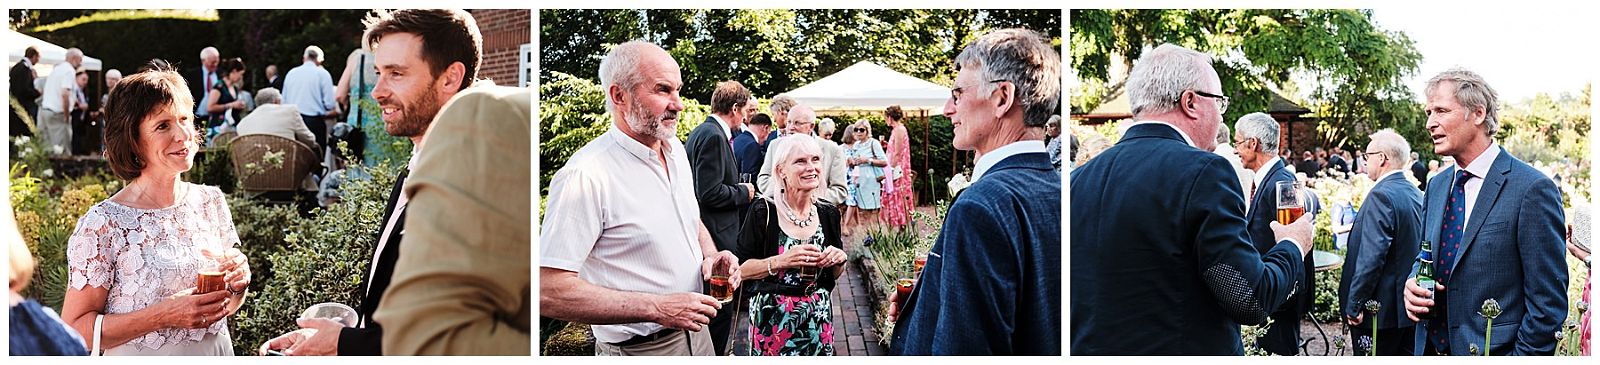 Candid photographs of the guests enjoying the wedding drinks reception in the summer sun at Goldstone Hall in Shropshire by Documentary Wedding Photographer Stuart James